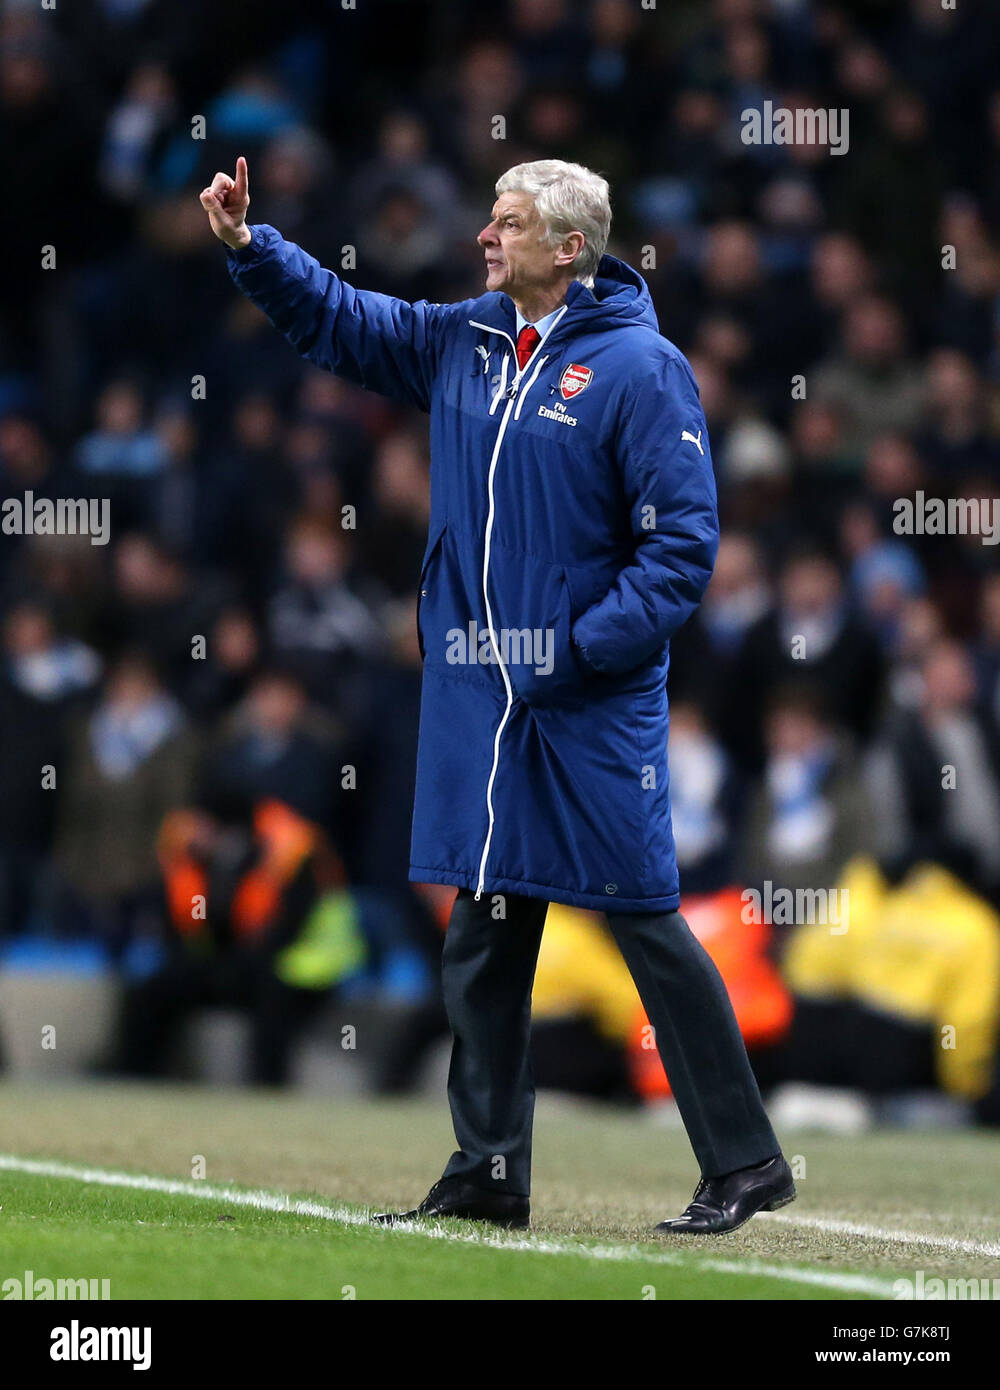 Soccer - Barclays Premier League - Manchester City v Arsenal - Etihad Stadium. Arsenal manager Arsene Wenger on the touchline during the Barclays Premier League match at the Etihad Stadium, Manchester. Stock Photo